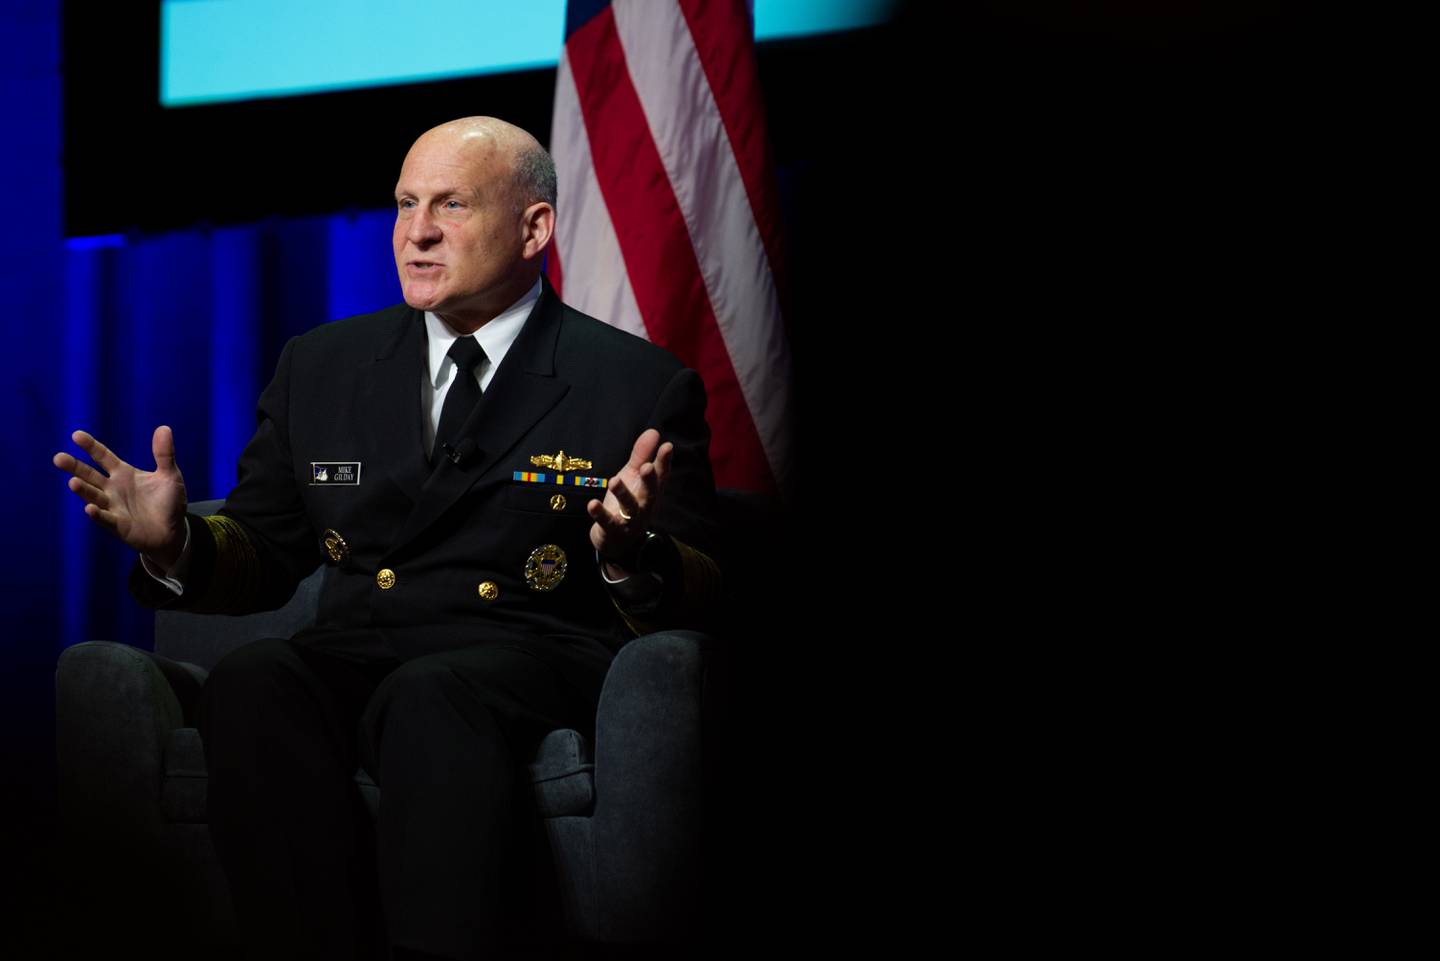 Chief of Naval Operations Adm. Mike Gilday speaks at the Sea-Air-Space conference in National Harbor, Maryland, on April 3, 2023.